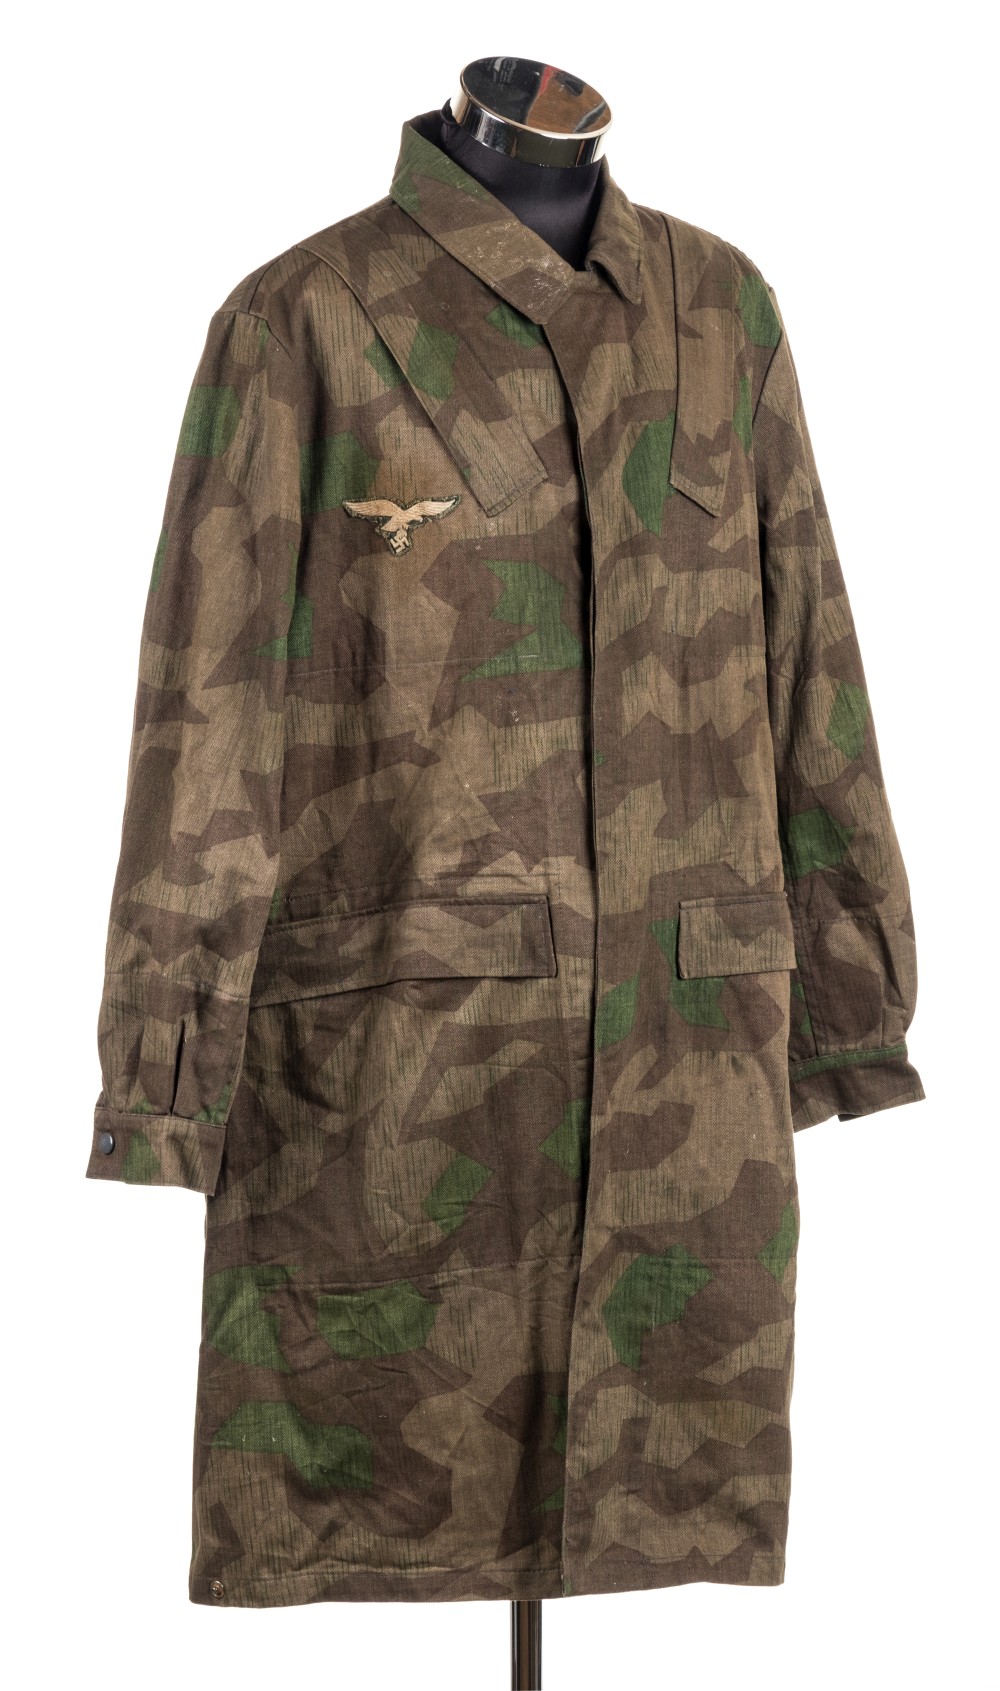 *Third Reich. Fallschirmjager (Paratroopers) camouflage smock, with cloth eagle badge, grey